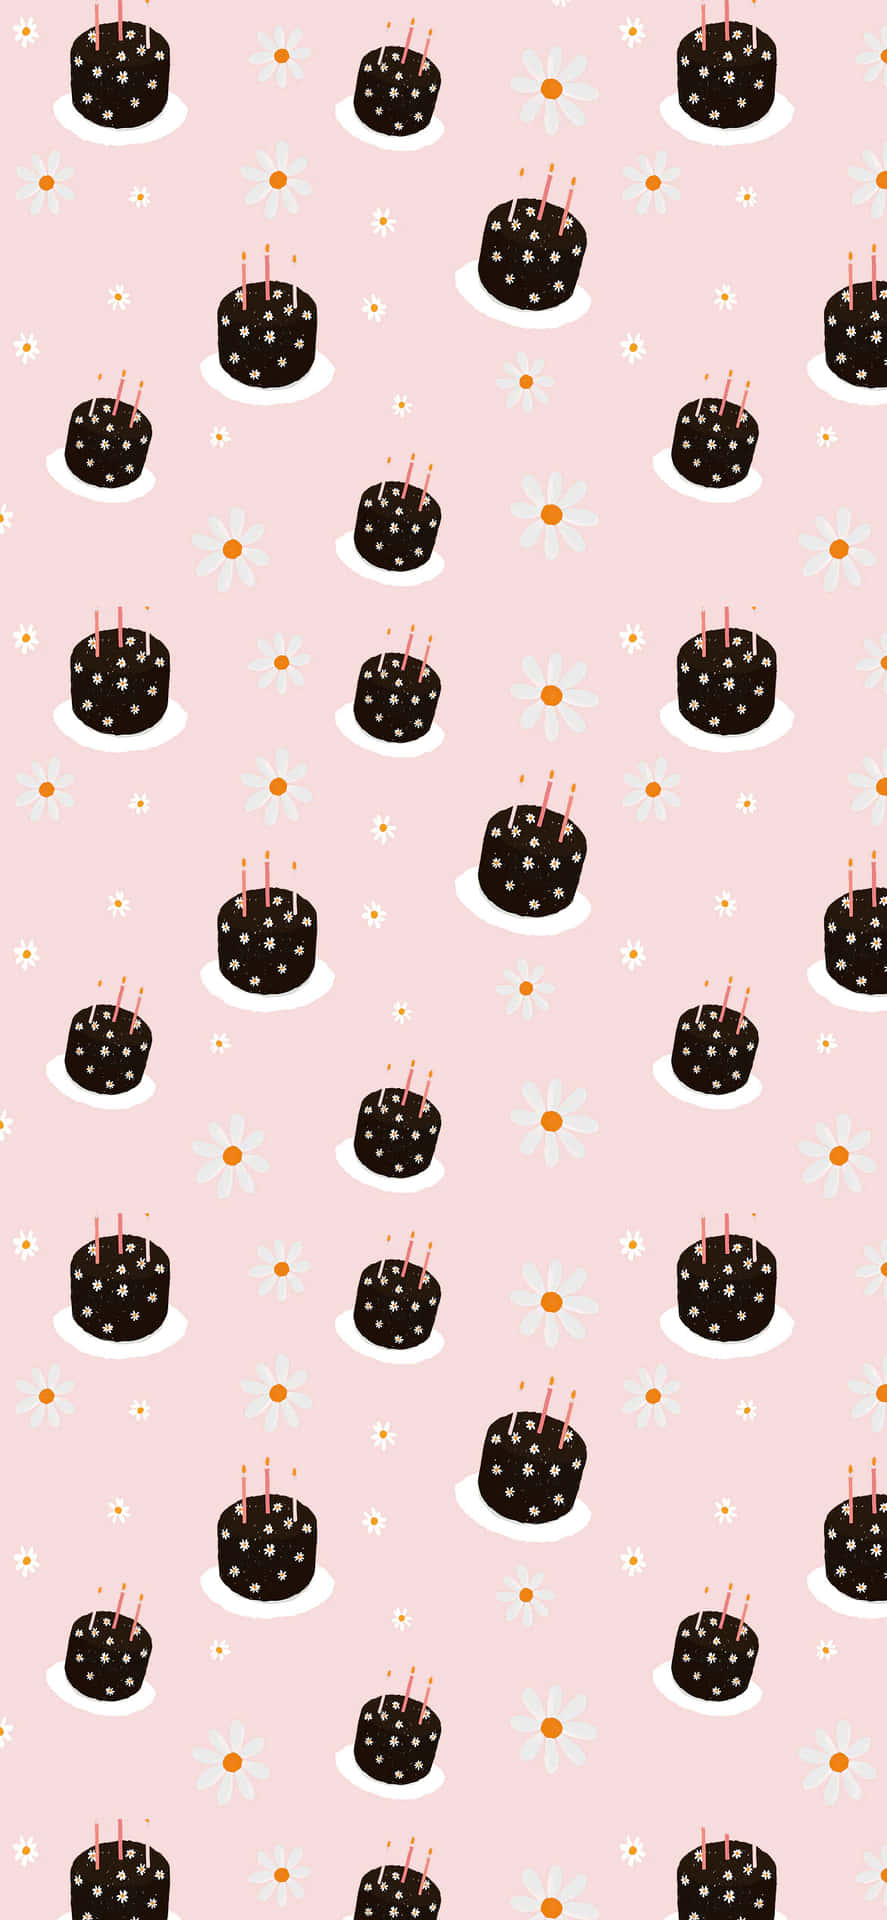 Let There Be Pink! Celebrate a Joyous Birthday! Wallpaper